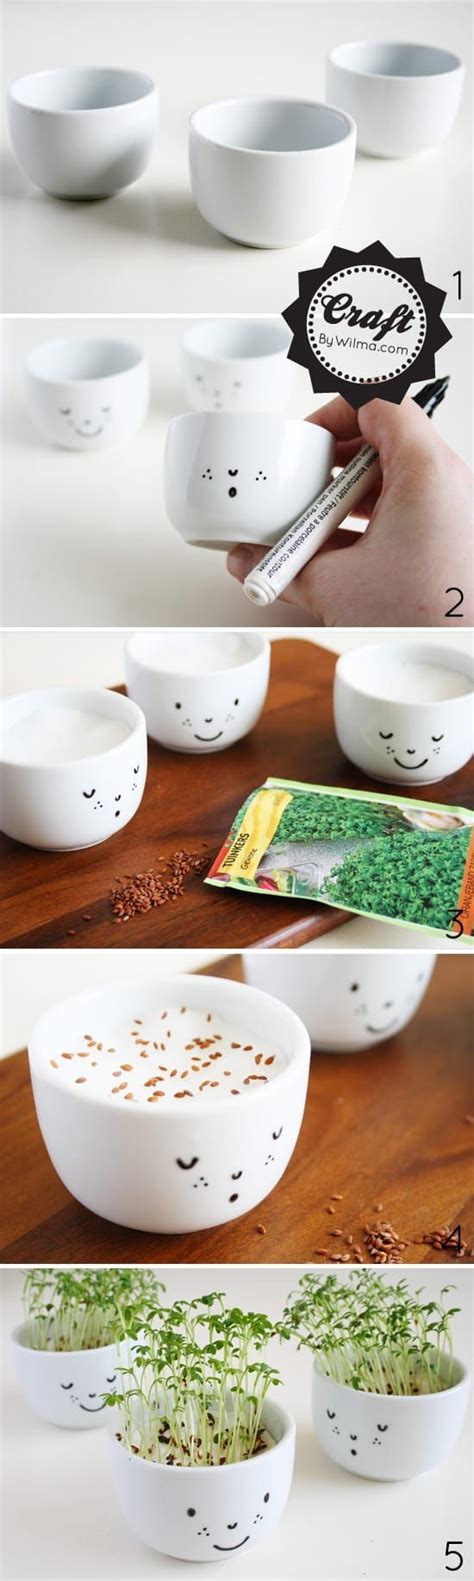 definitively cutest diy projects   time cute diy projects